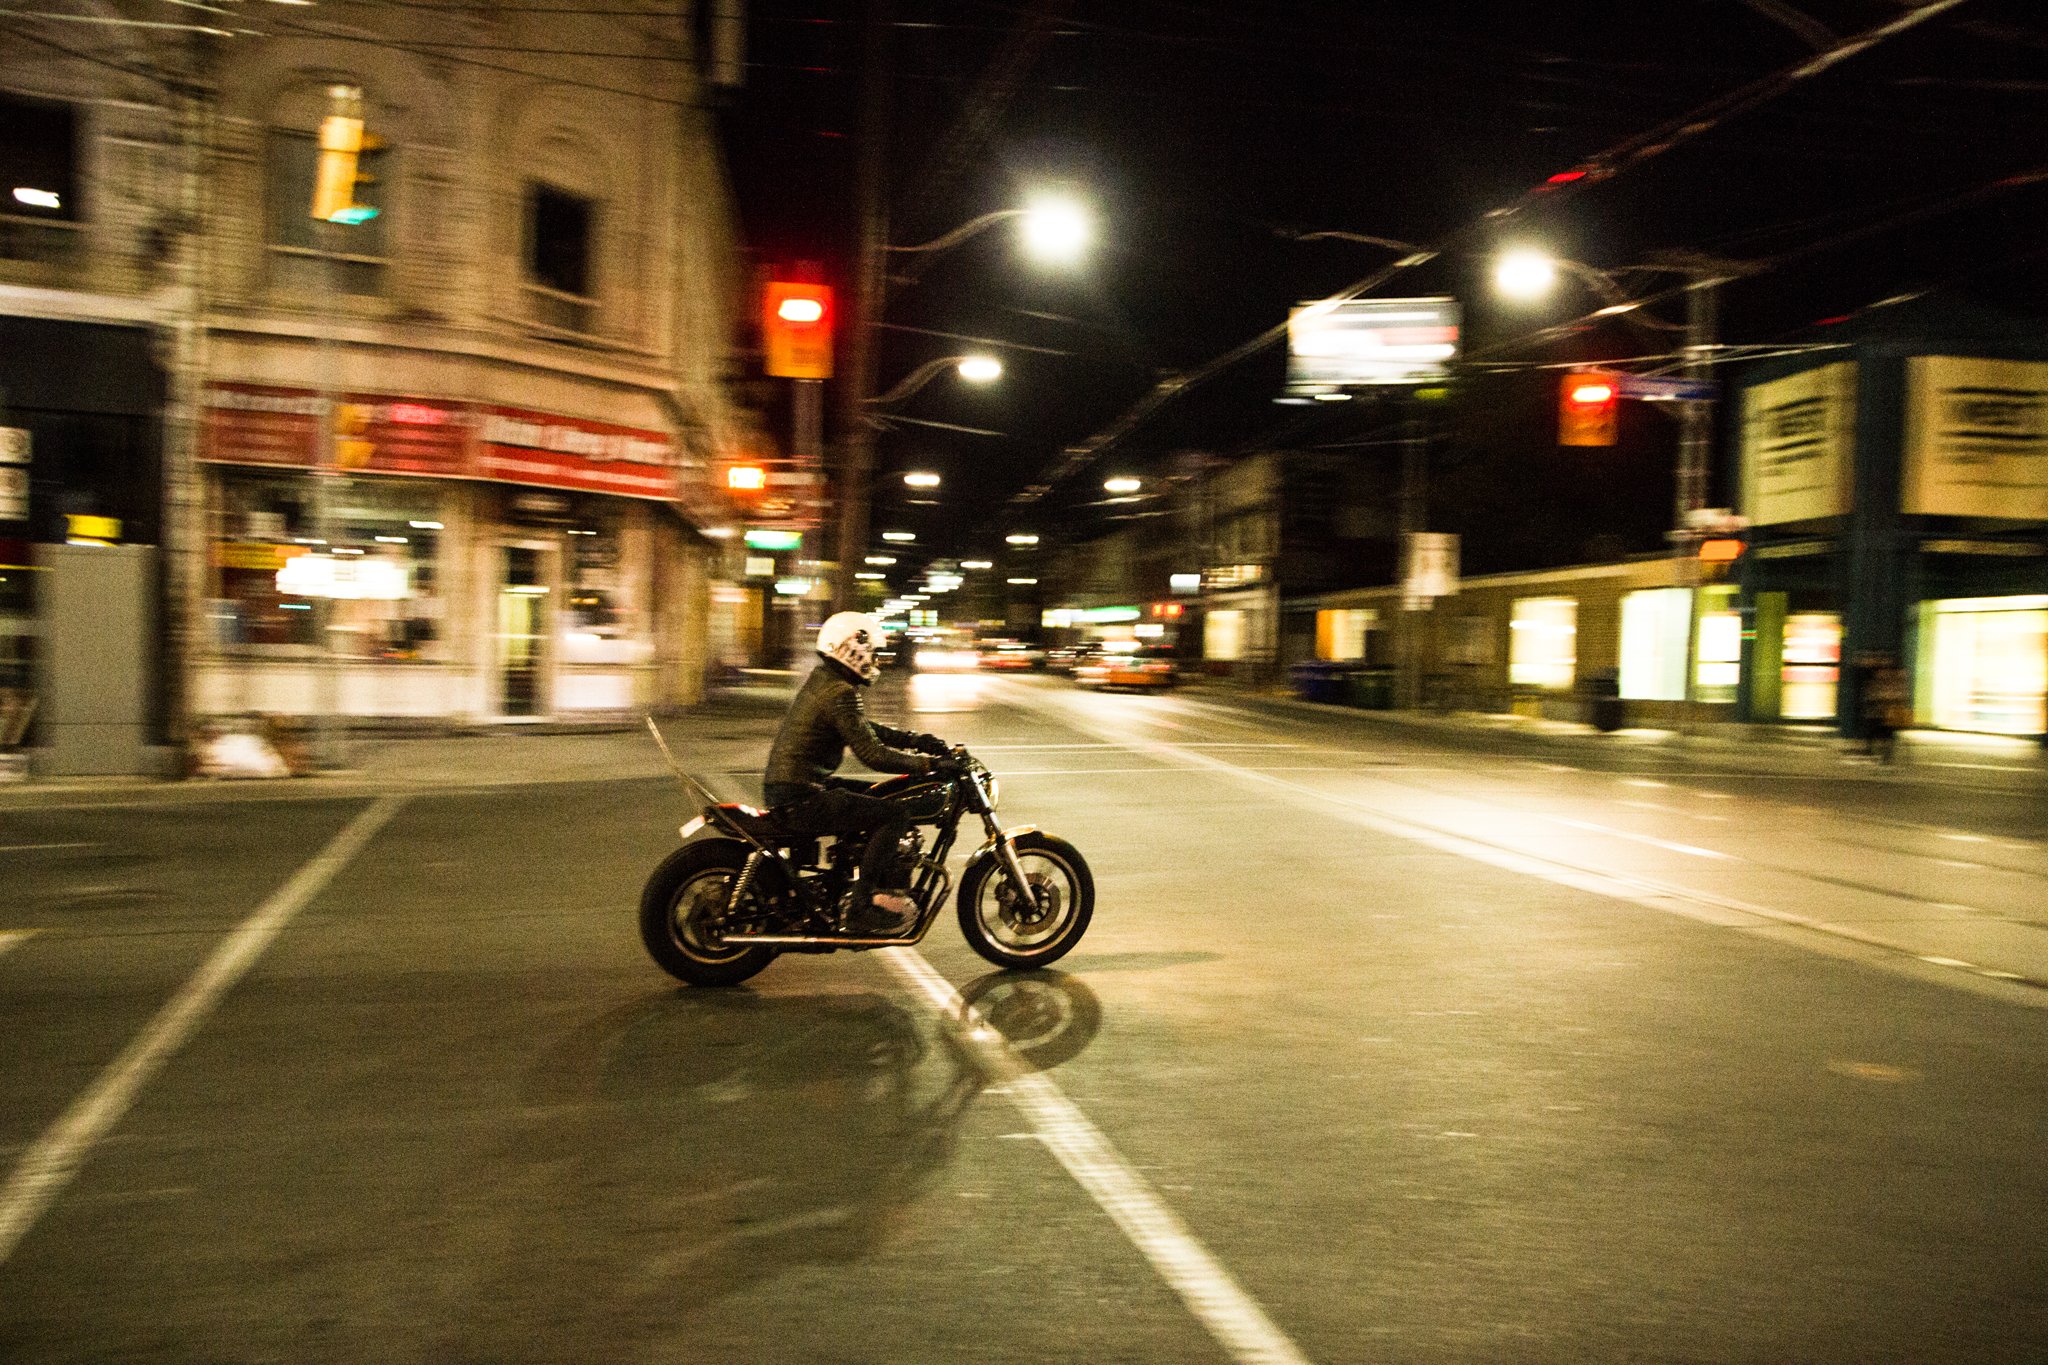 motorcycle, retro, street, lights, rider, nostalgic, toronto, canada, leather, two wheels, riding, vehicle, nostalgia, look back, motorcyclist, helmet, leather suit, classic, style, night life, ride out, intersection, city lights,, Марко Радовановић